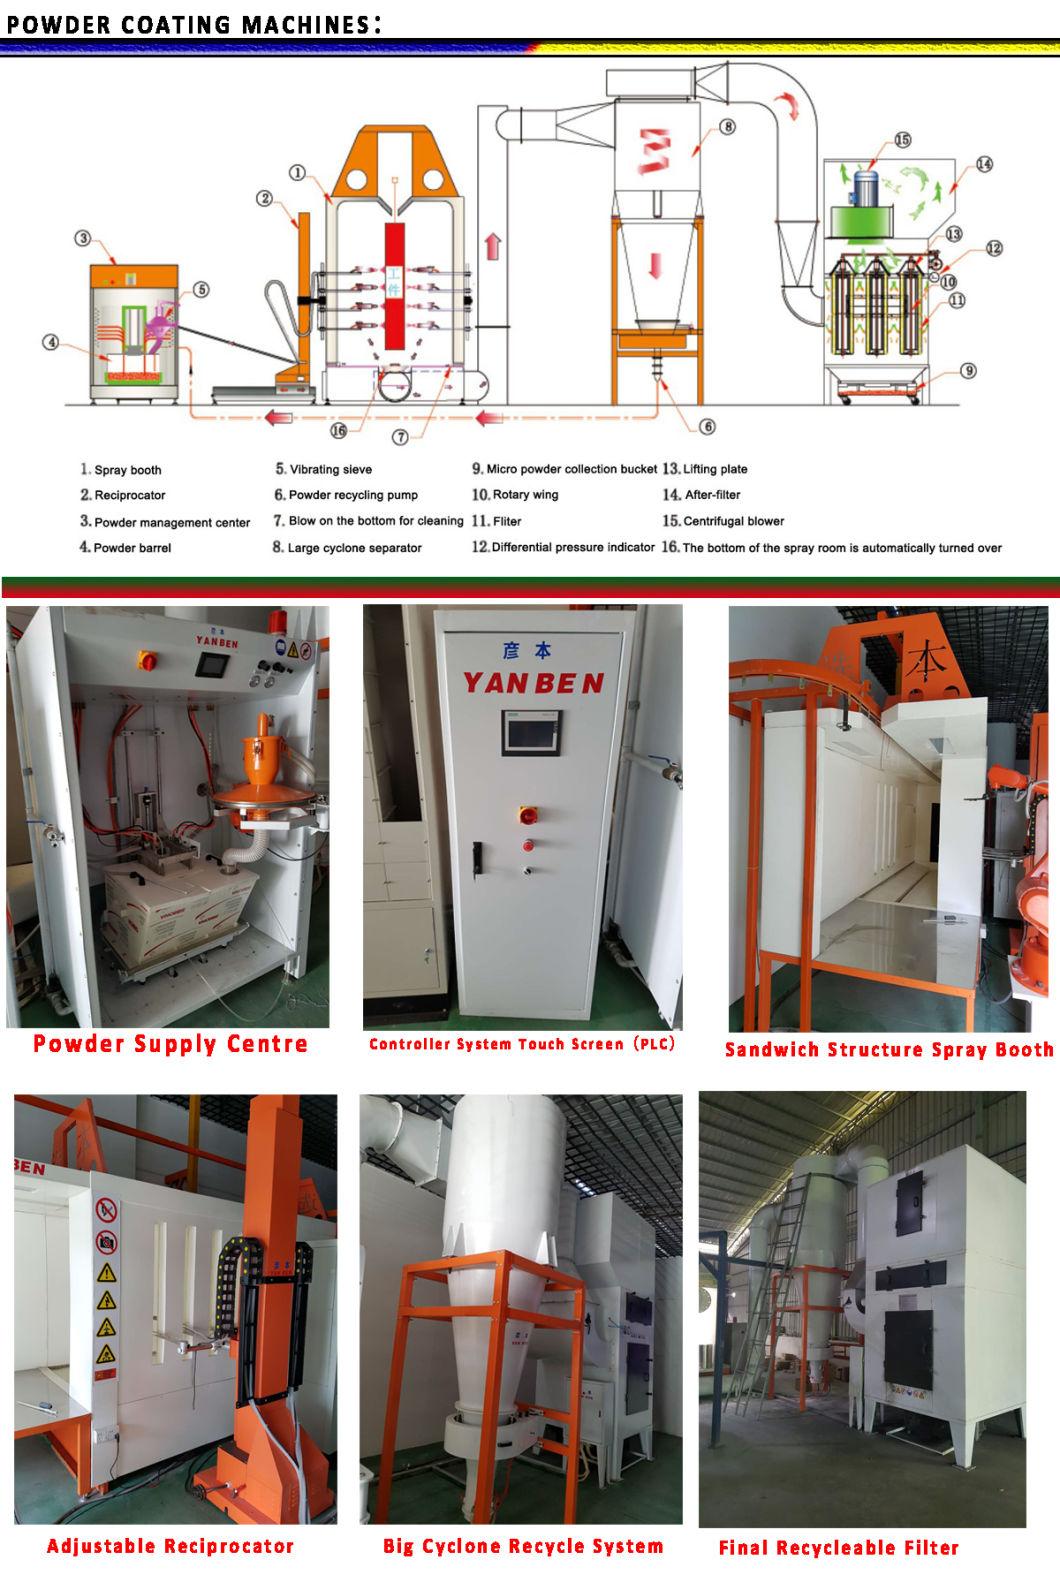 High Recovery Rate Powder Coating Equipment with Big Cyclone Fast Color Change Equipment